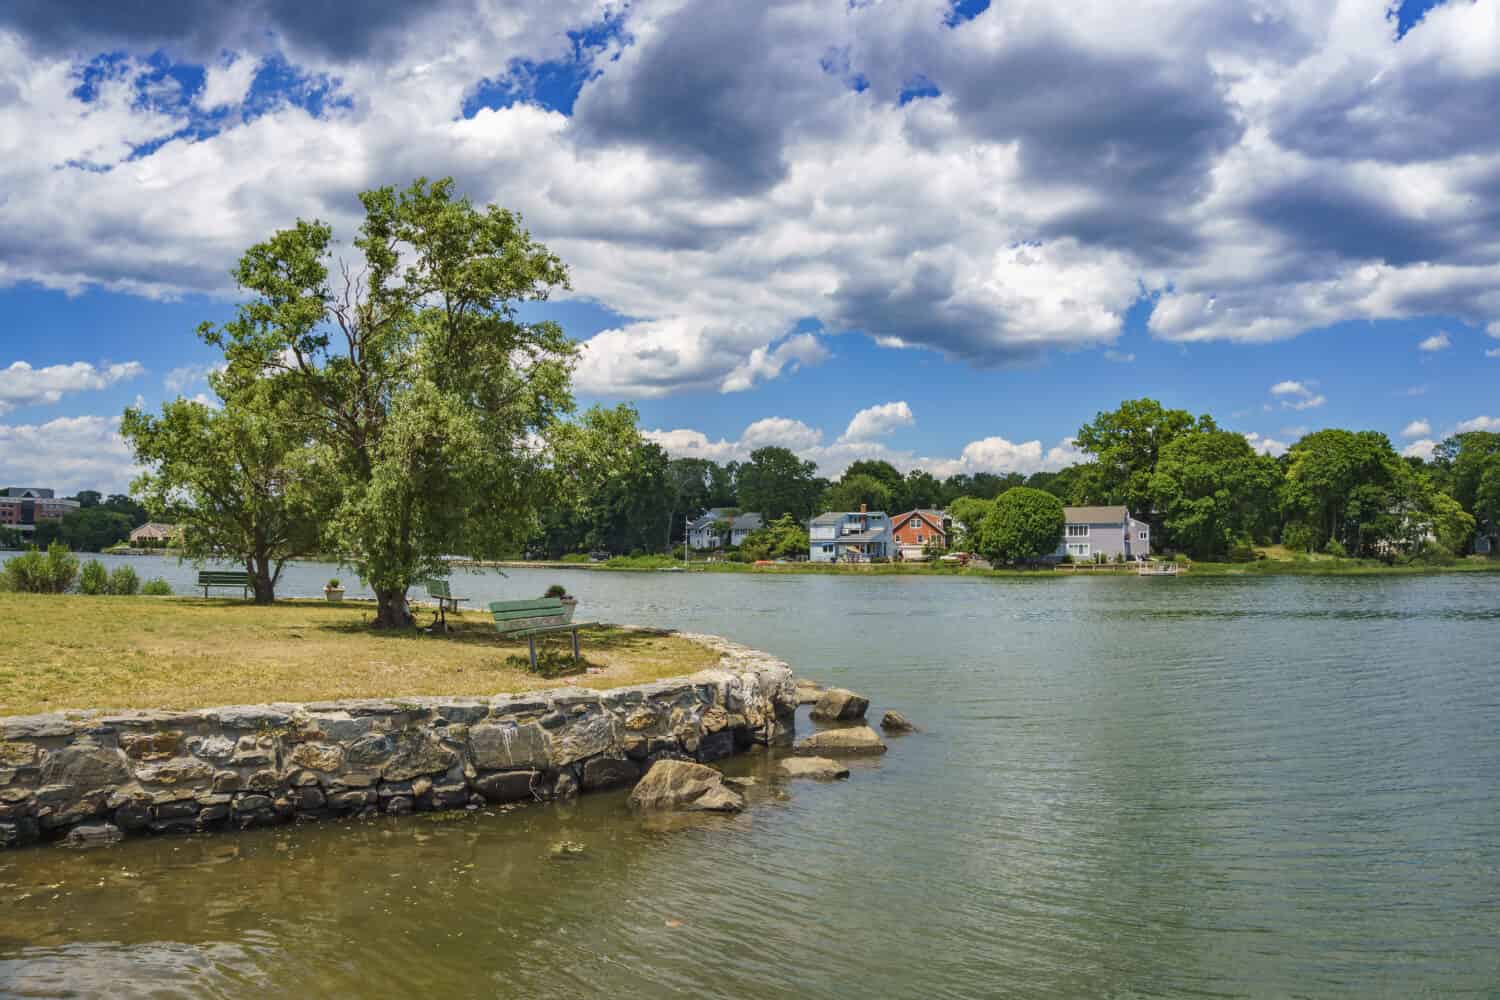 The wonderful Cove Island Park at Stamford, a city in Fairfield County, Connecticut, United States of America.